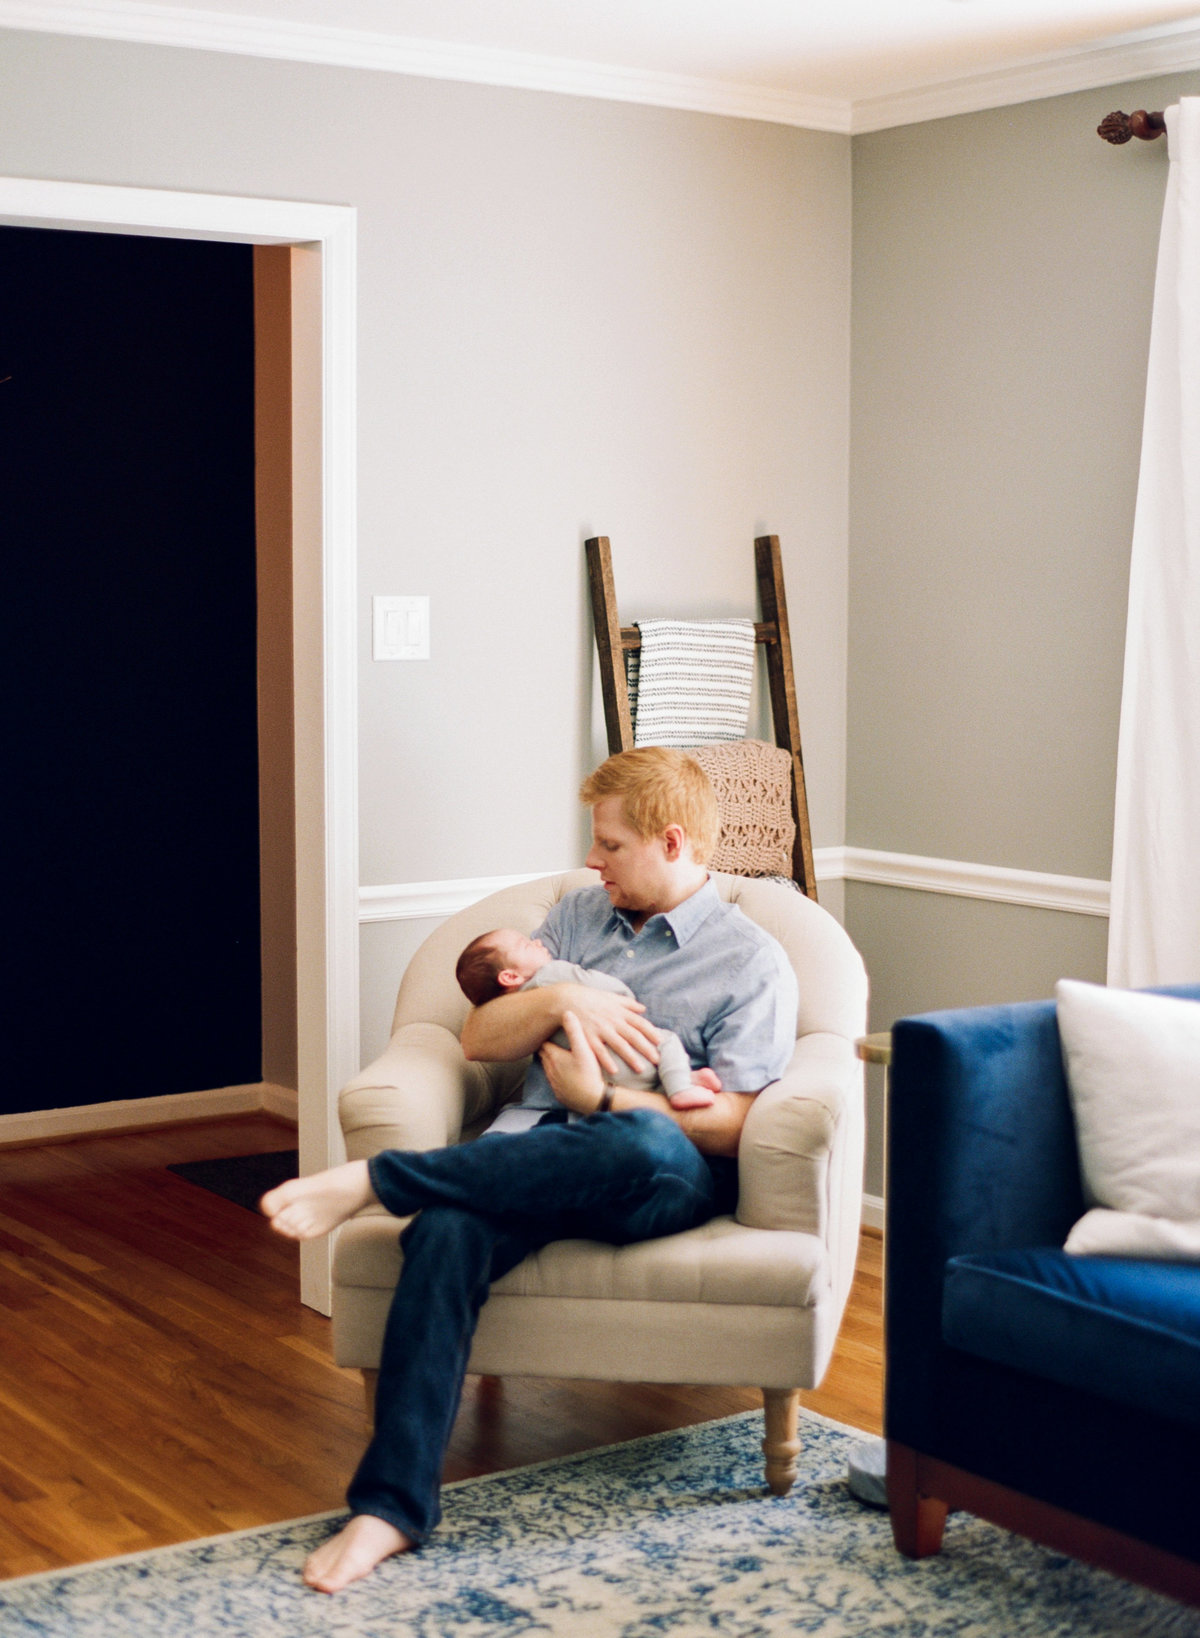 Dad sits in the living room looking adoringly at his newly adopted son during his newborn photography session in Raleigh. Photographed by Raleigh newborn photographers A.J. Dunlap Photography.